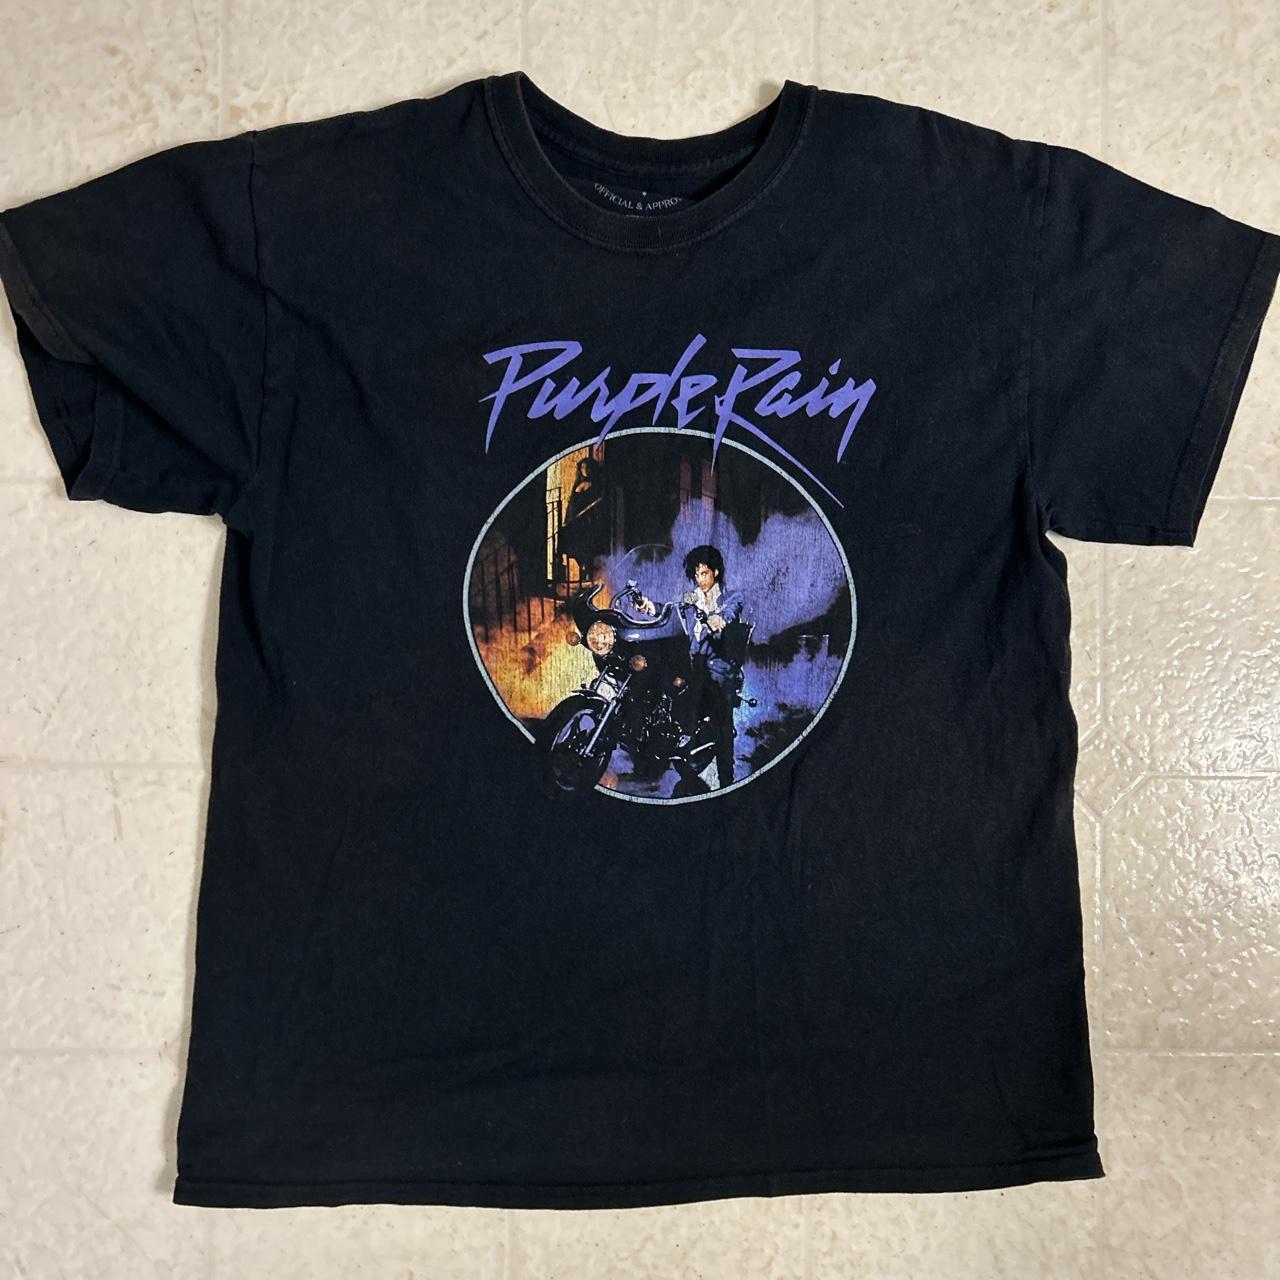 Men's Large Official Prince Graphic Tee - Depop